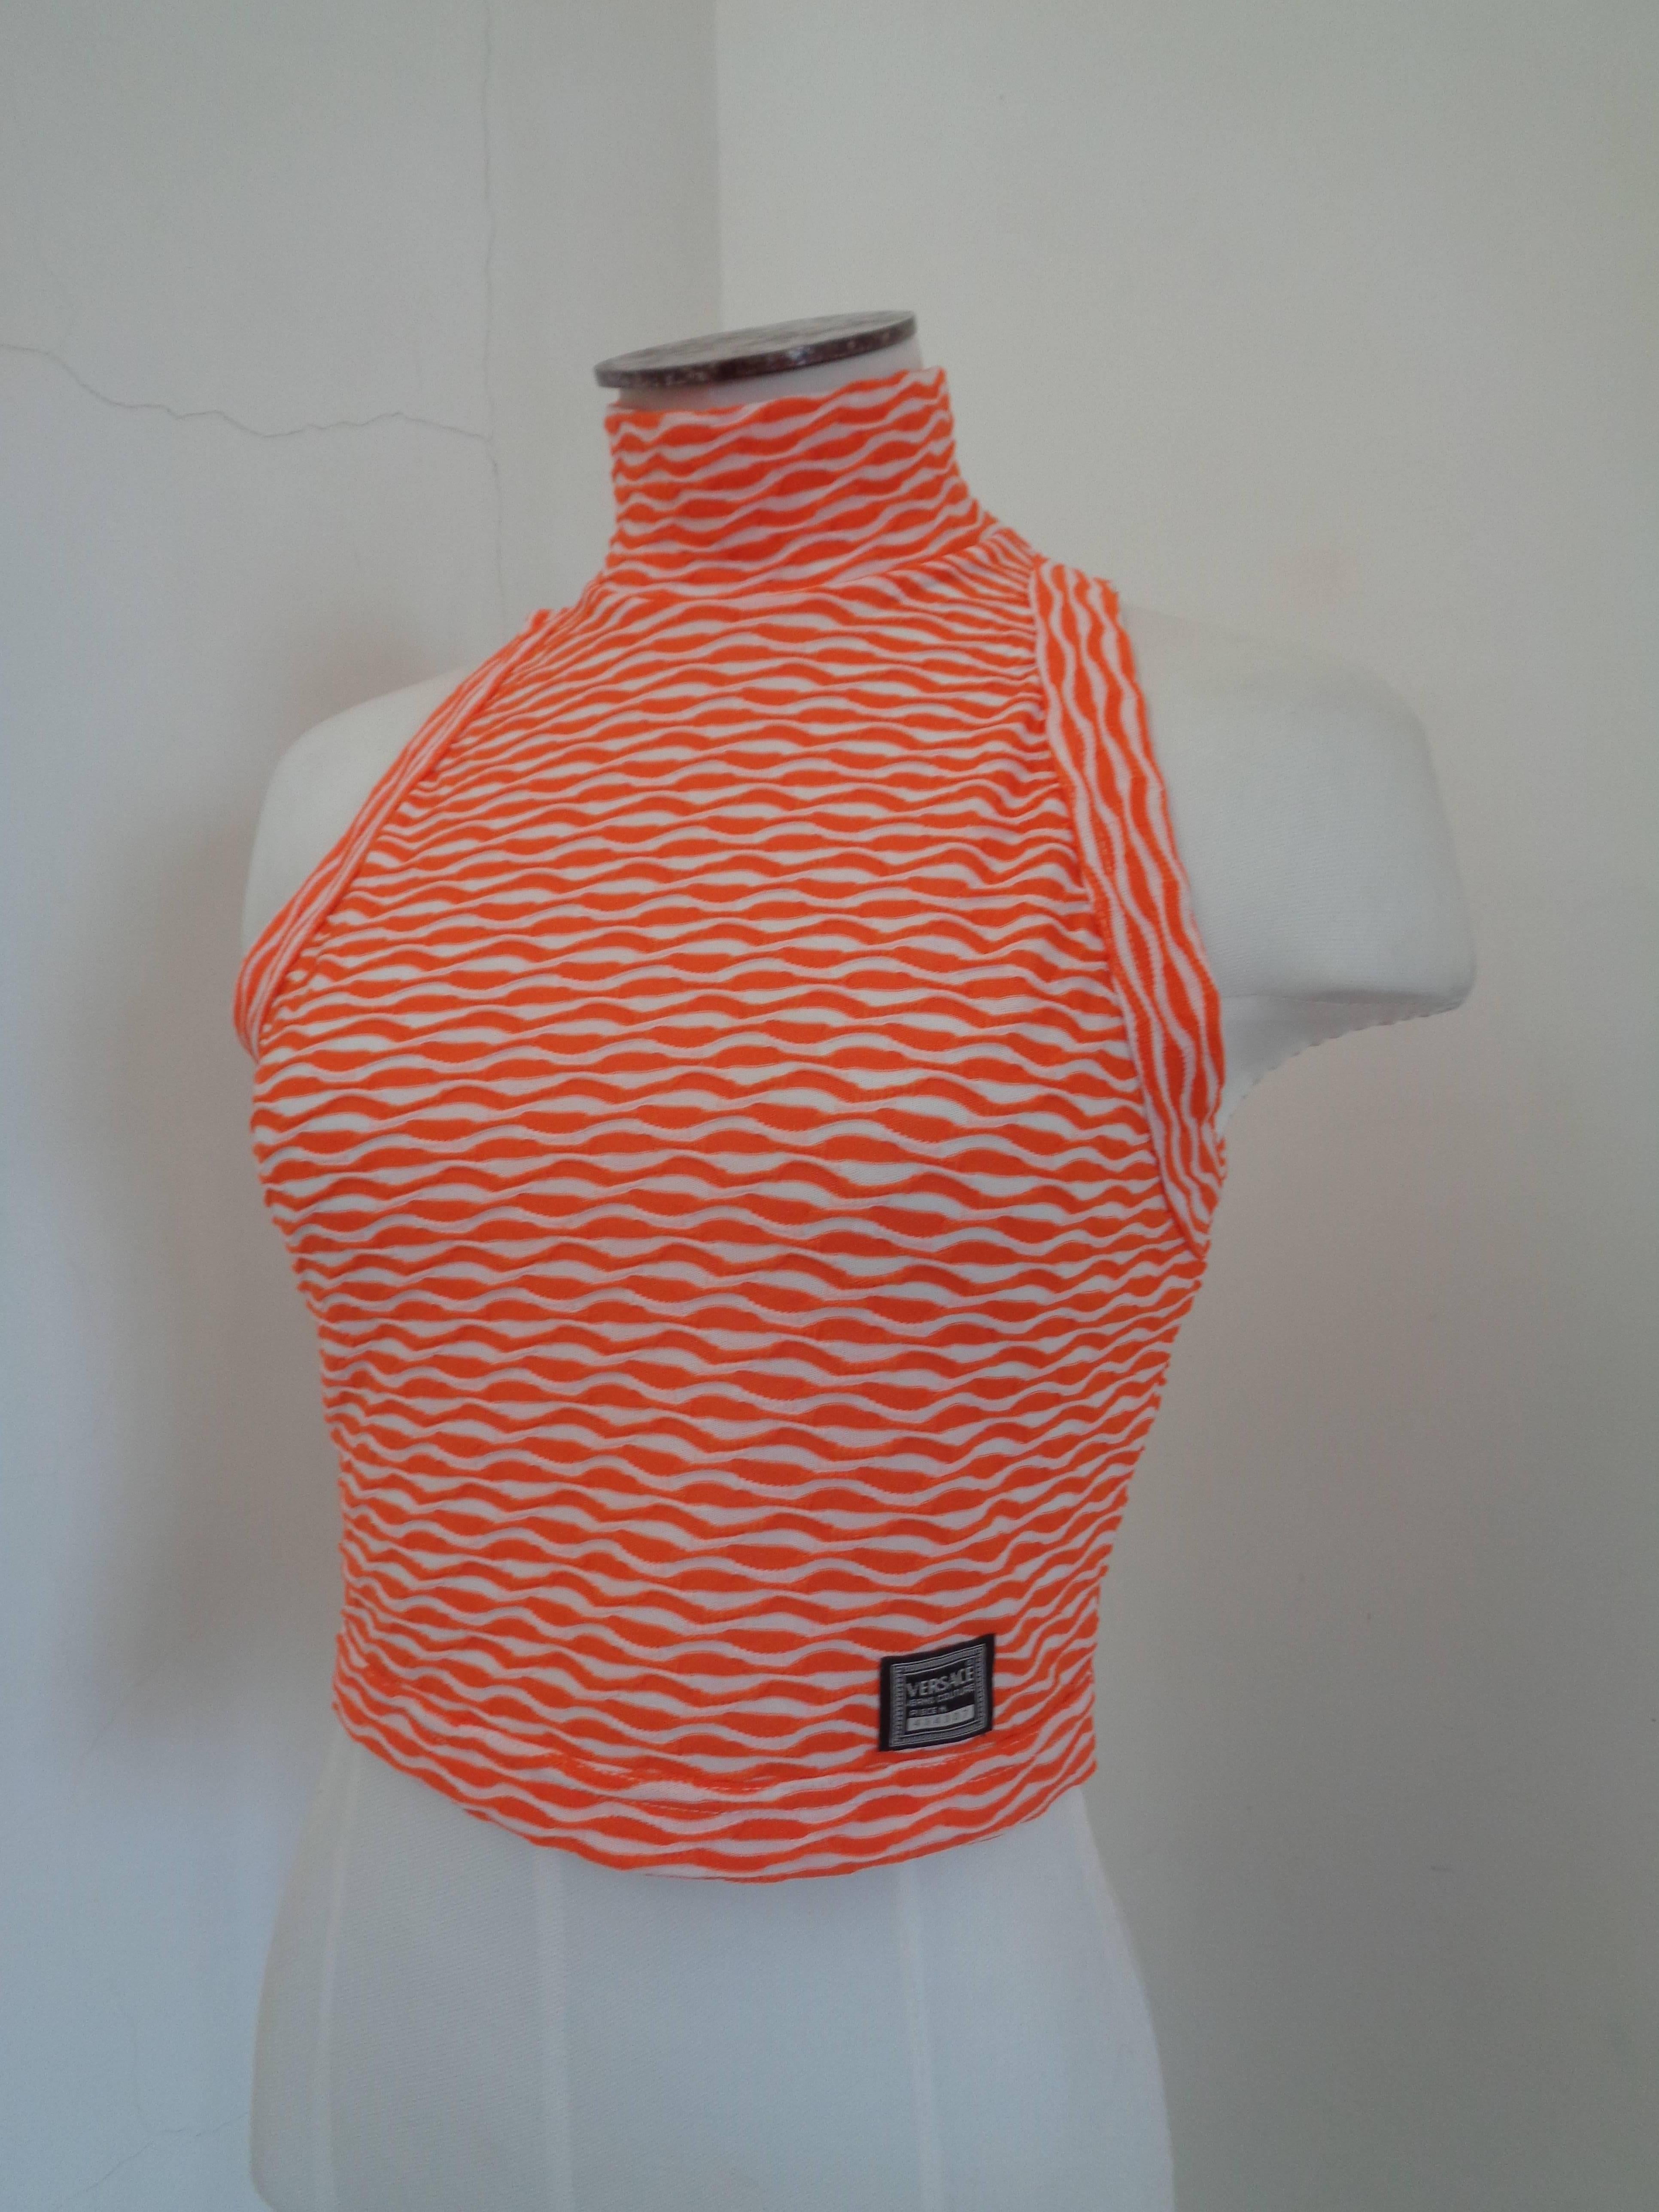 Versace Jeans Couture White Orange top

Totally made in italy in italian size range S

Composition: Polyestere